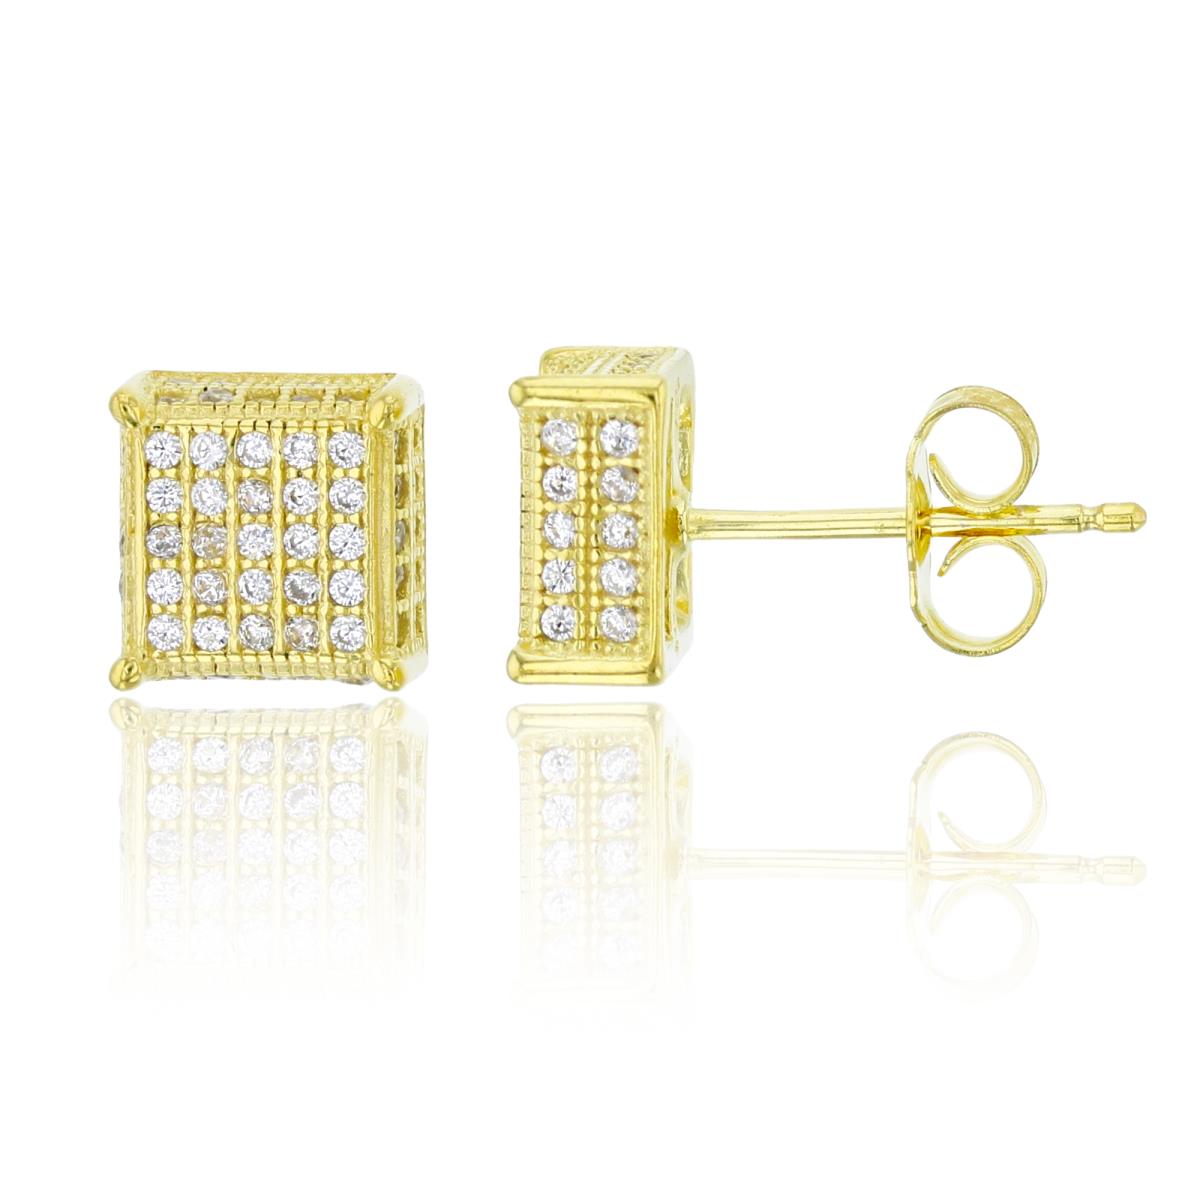 Sterling Silver Yellow 8.3x8.3mm Micropave Square Stud Earring